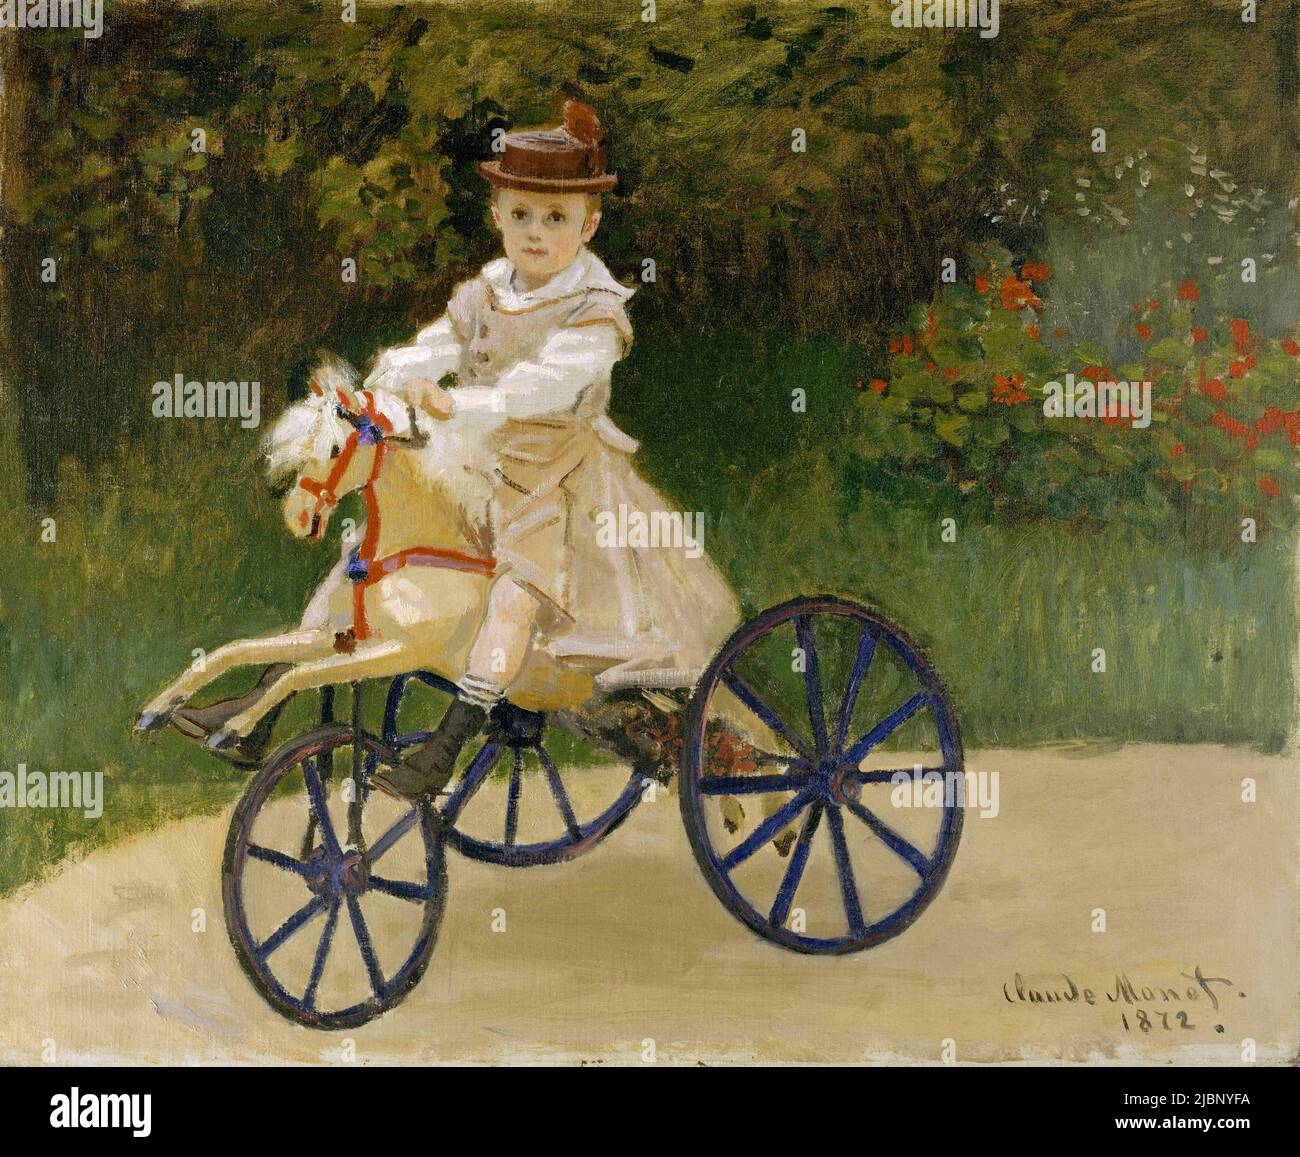 Jean Monet On His Hobby Horse, 1872. Painting by Claude Monet Stock Photo